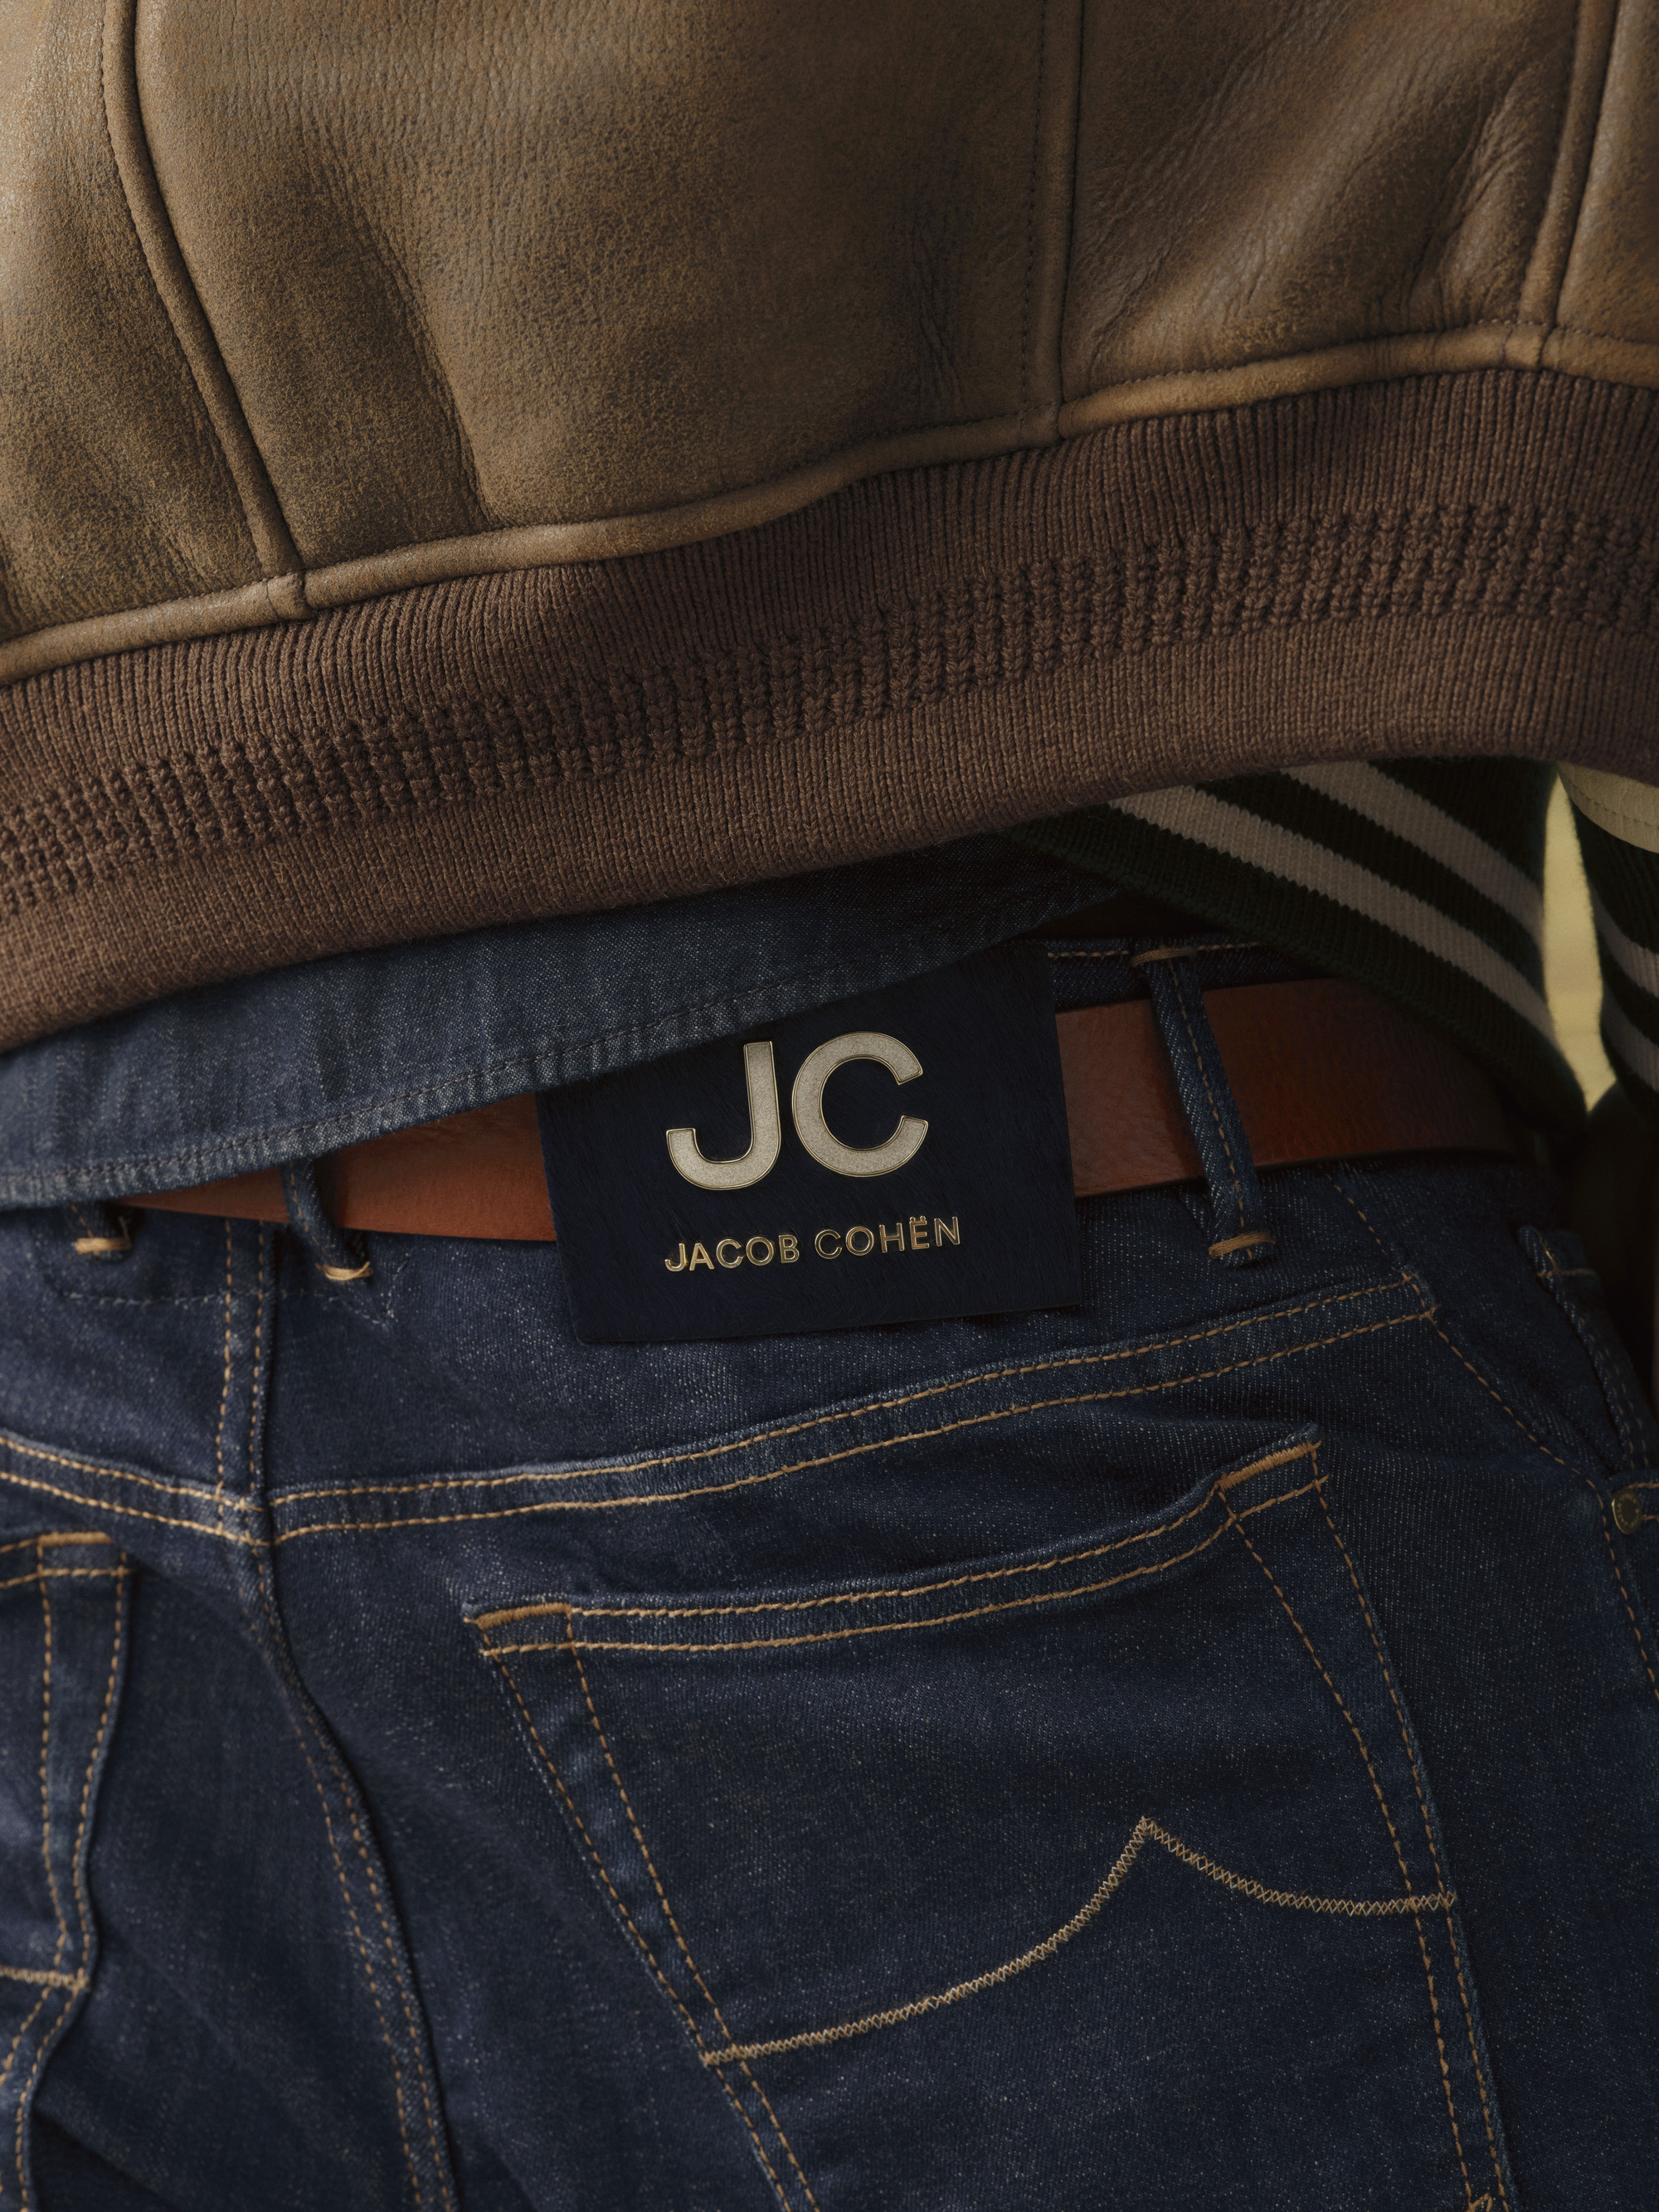 Jacob Cohën And The Rise Of High-End Denim